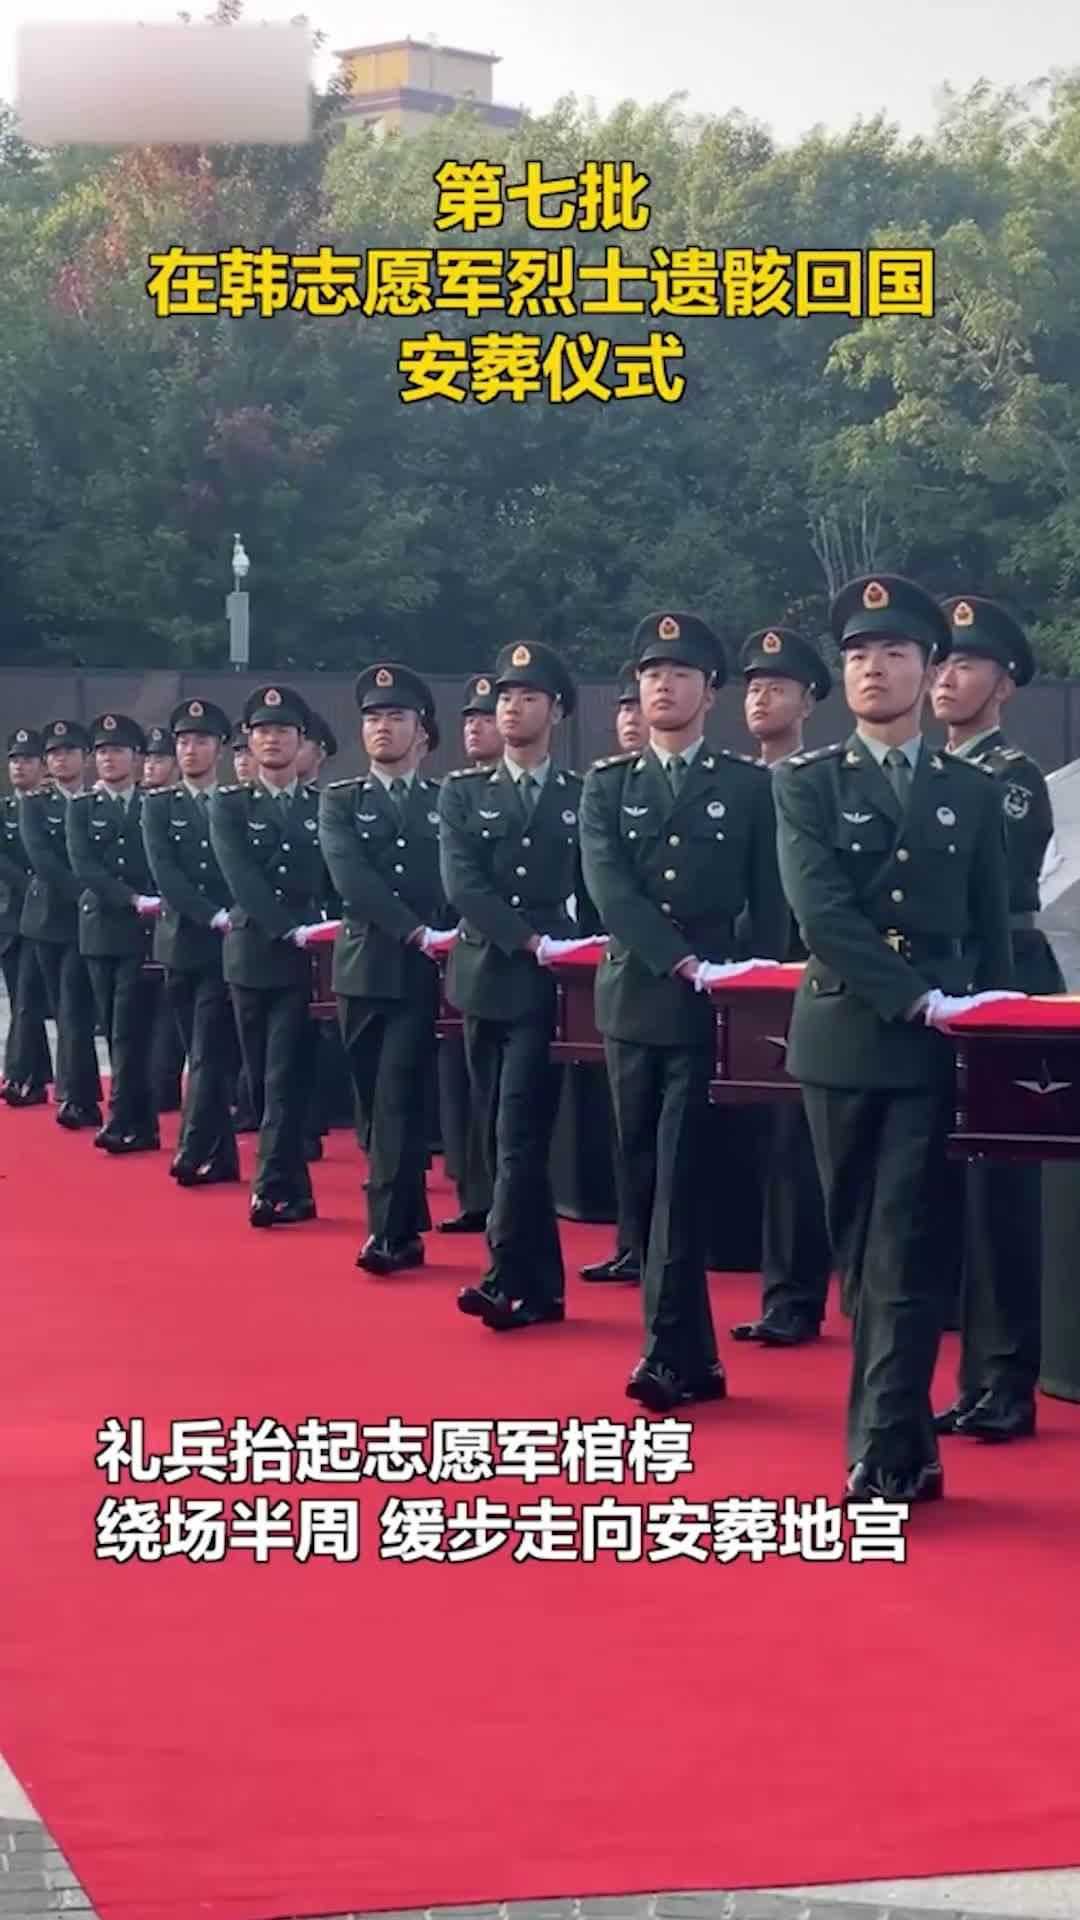 More remains of Chinese soldiers in Korean War returned - SHINE News